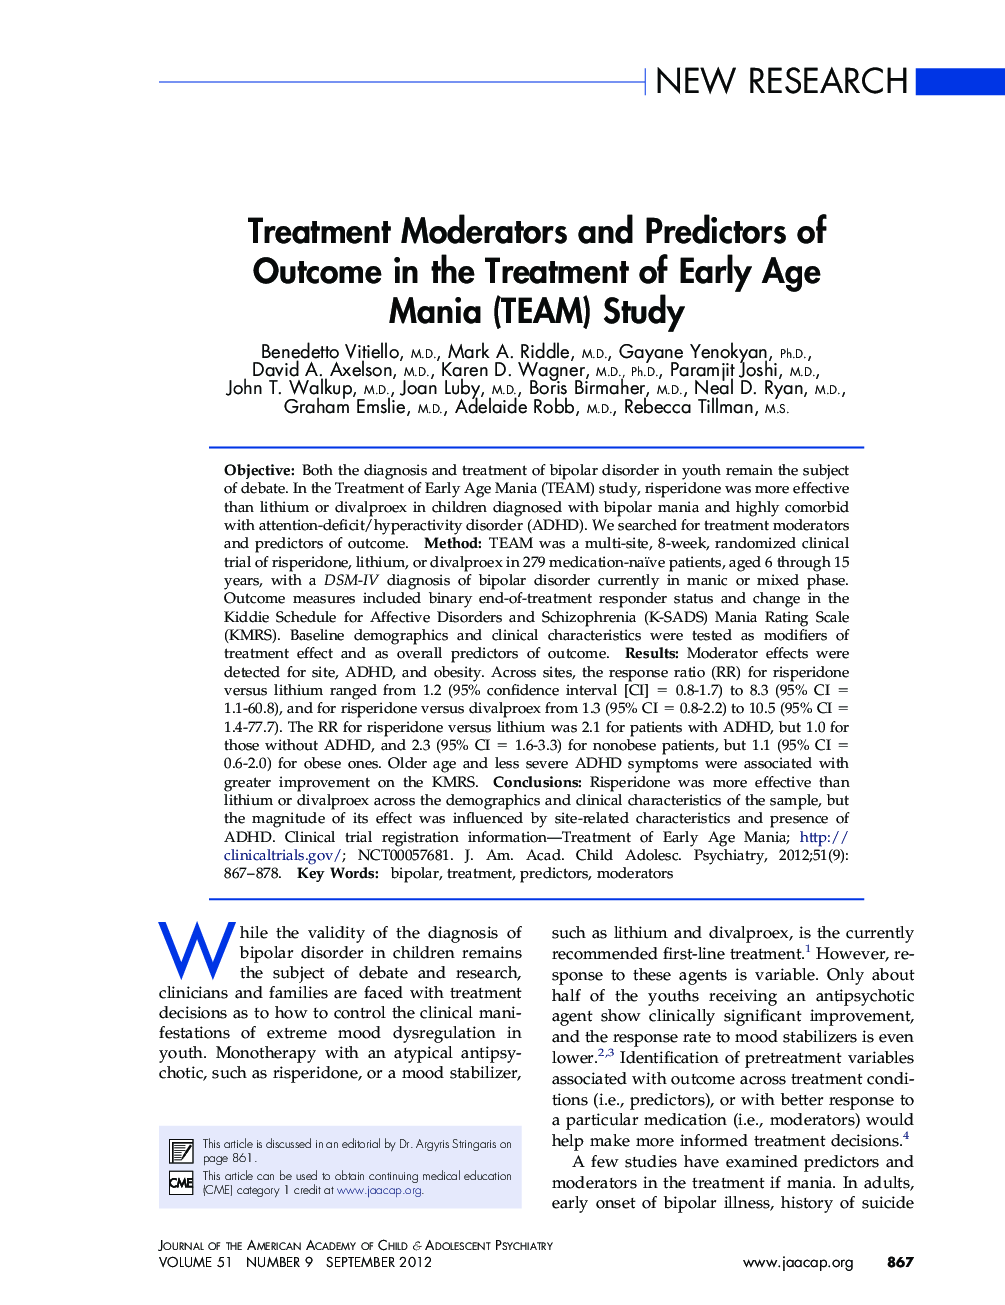 Treatment Moderators and Predictors of Outcome in the Treatment of Early Age Mania (TEAM) Study